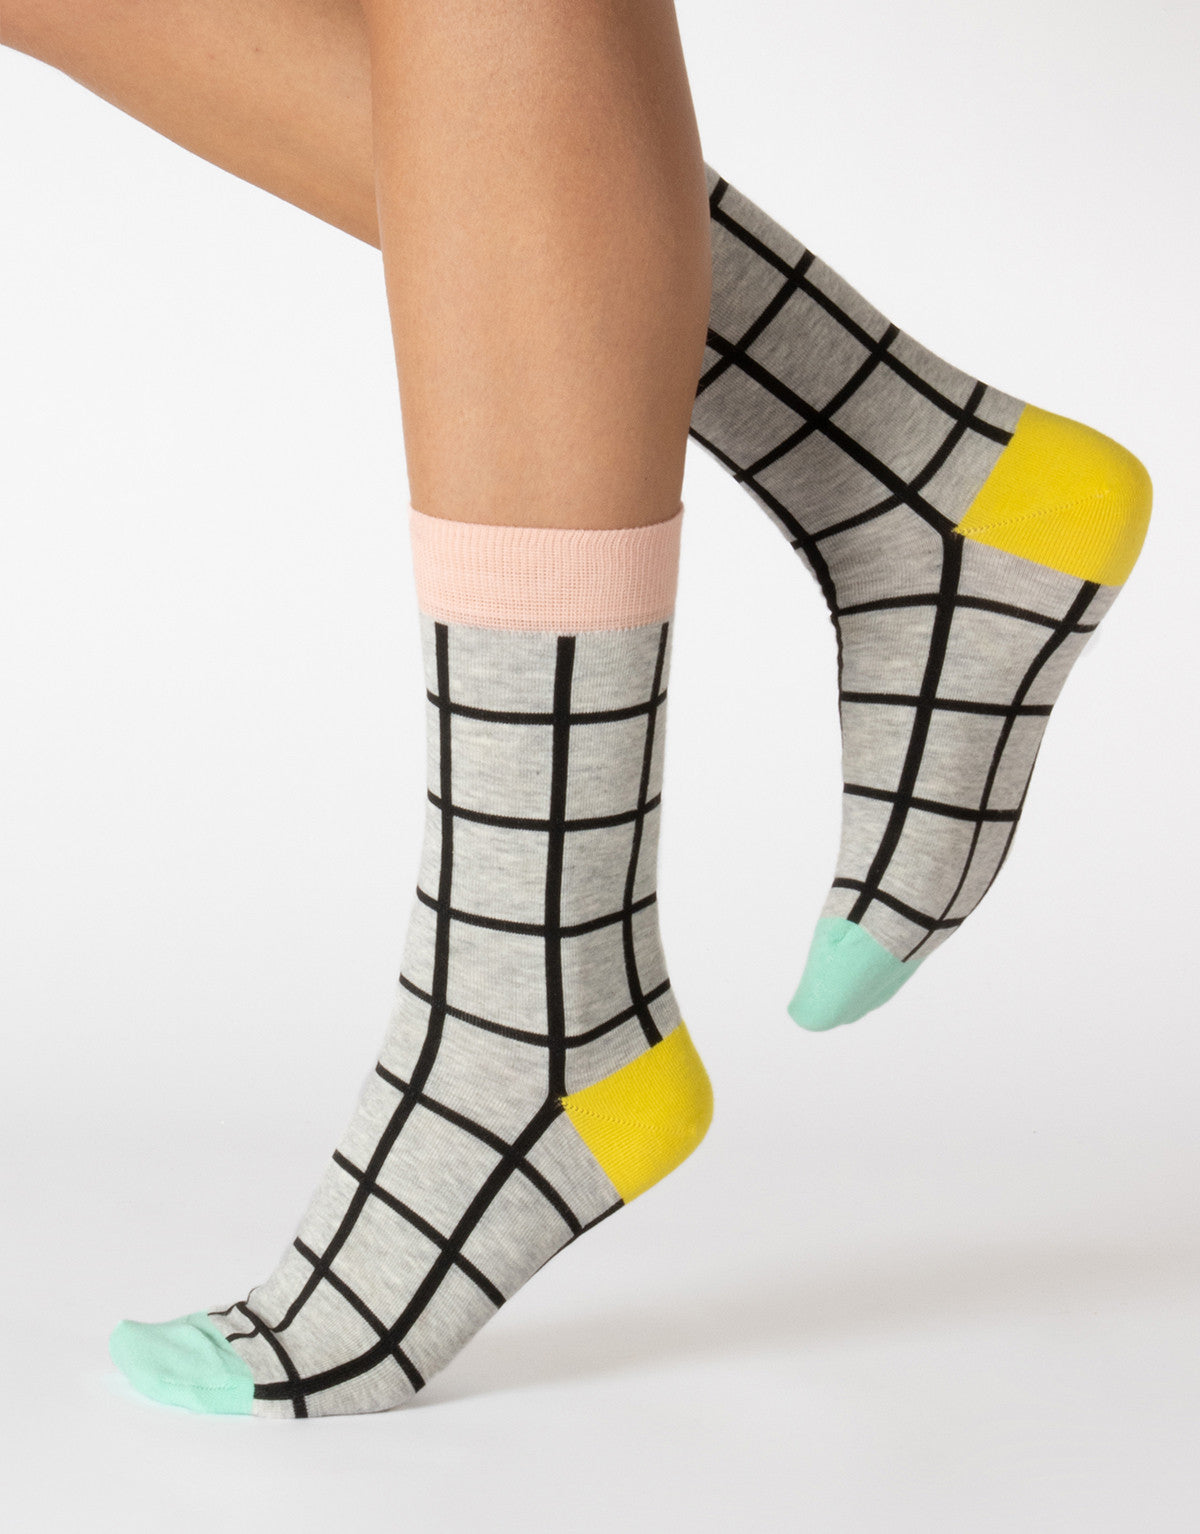 Calzitaly Checkered Cotton Socks - Grey ankle length cotton ankle socks with a black linear square pattern, dusty pink cuff, yellow shaped heal and mint green toe with flat seams.